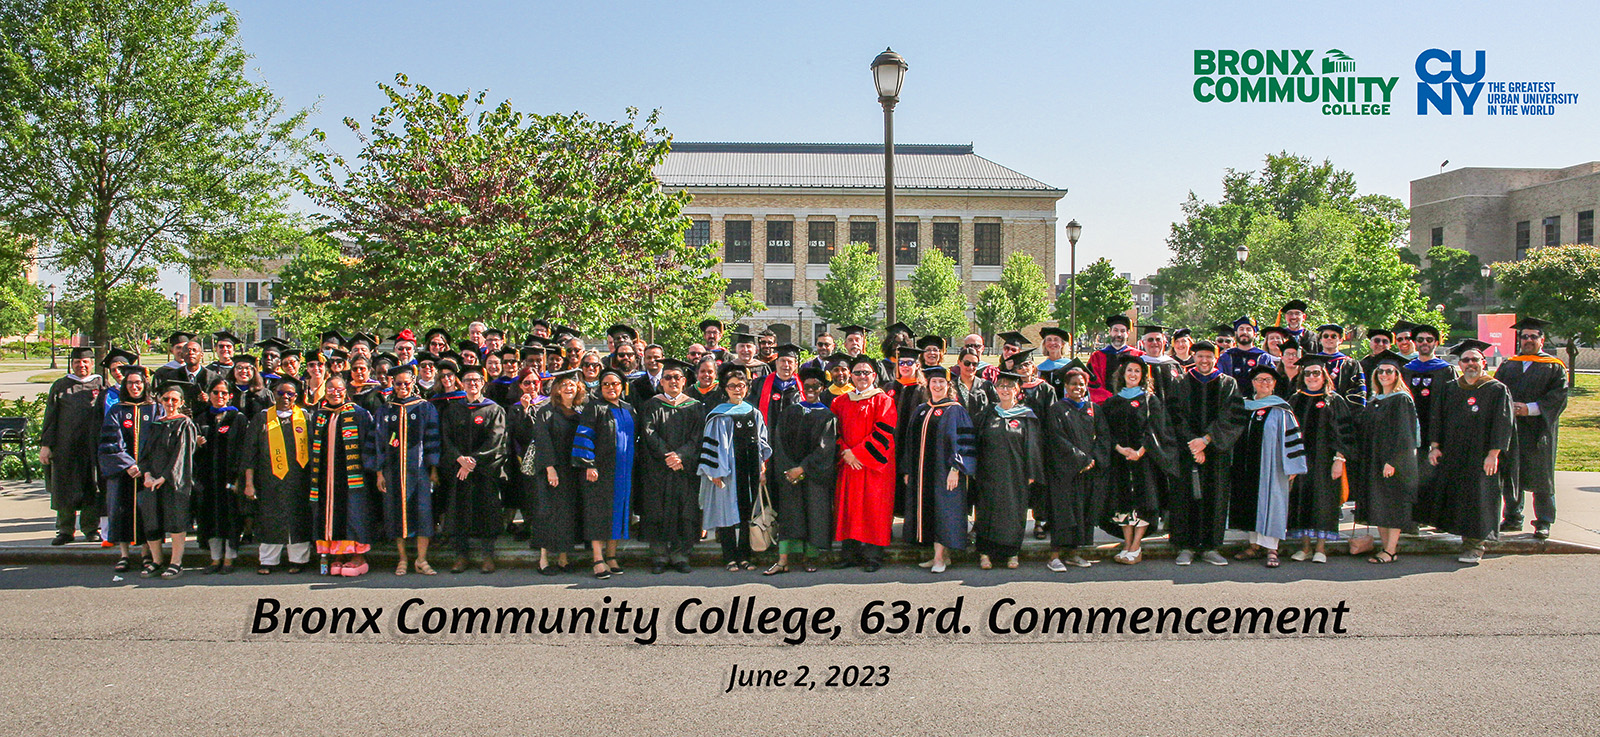 BCC 63rd Commencement